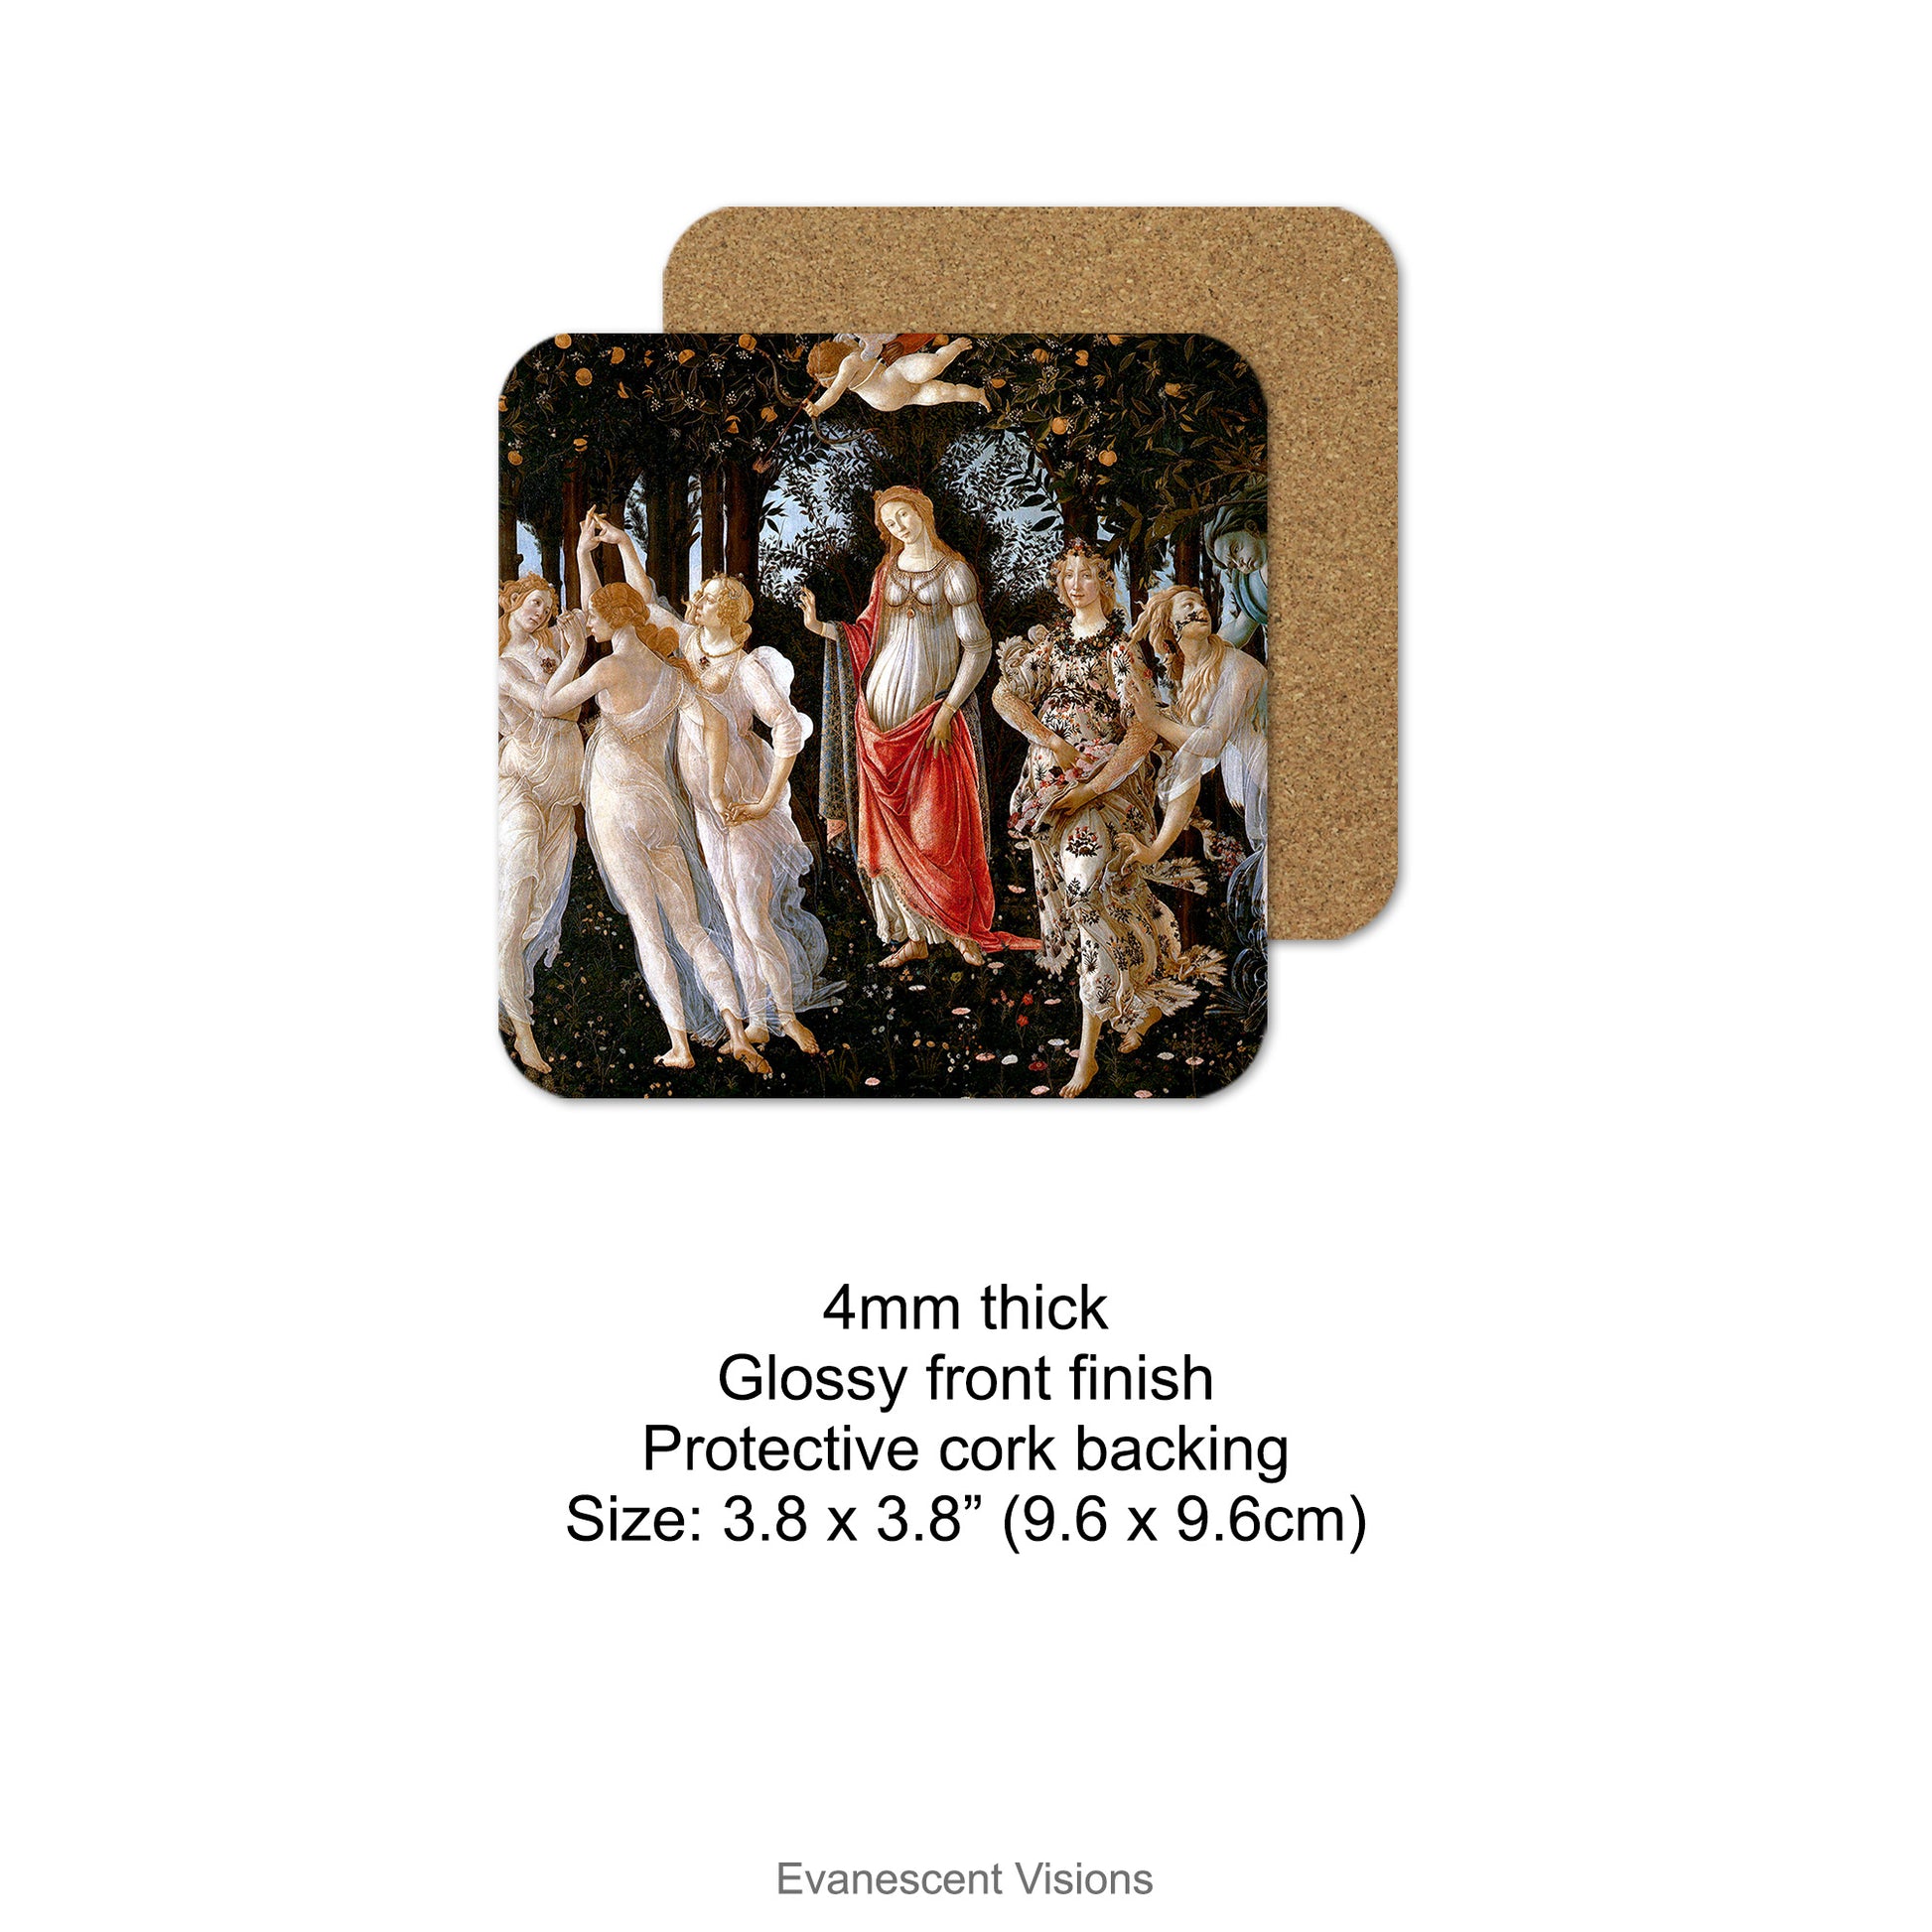 Single Coaster with image from Botticelli's Primavera shown with image of protective cork backing and product details